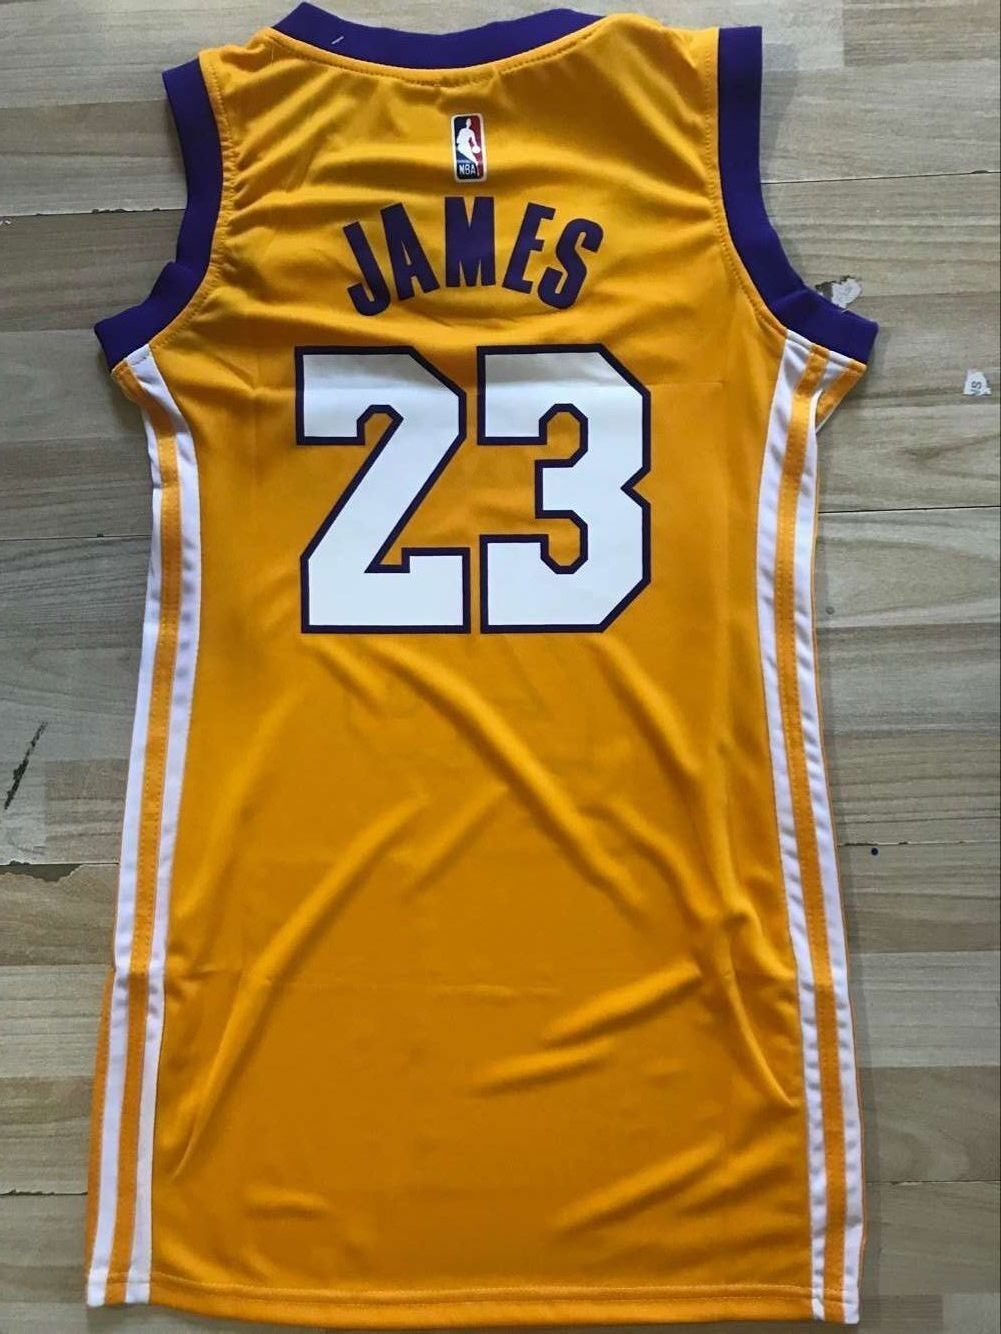 Womens NBA Los Angeles Lakers #23 James Yellow Jersey